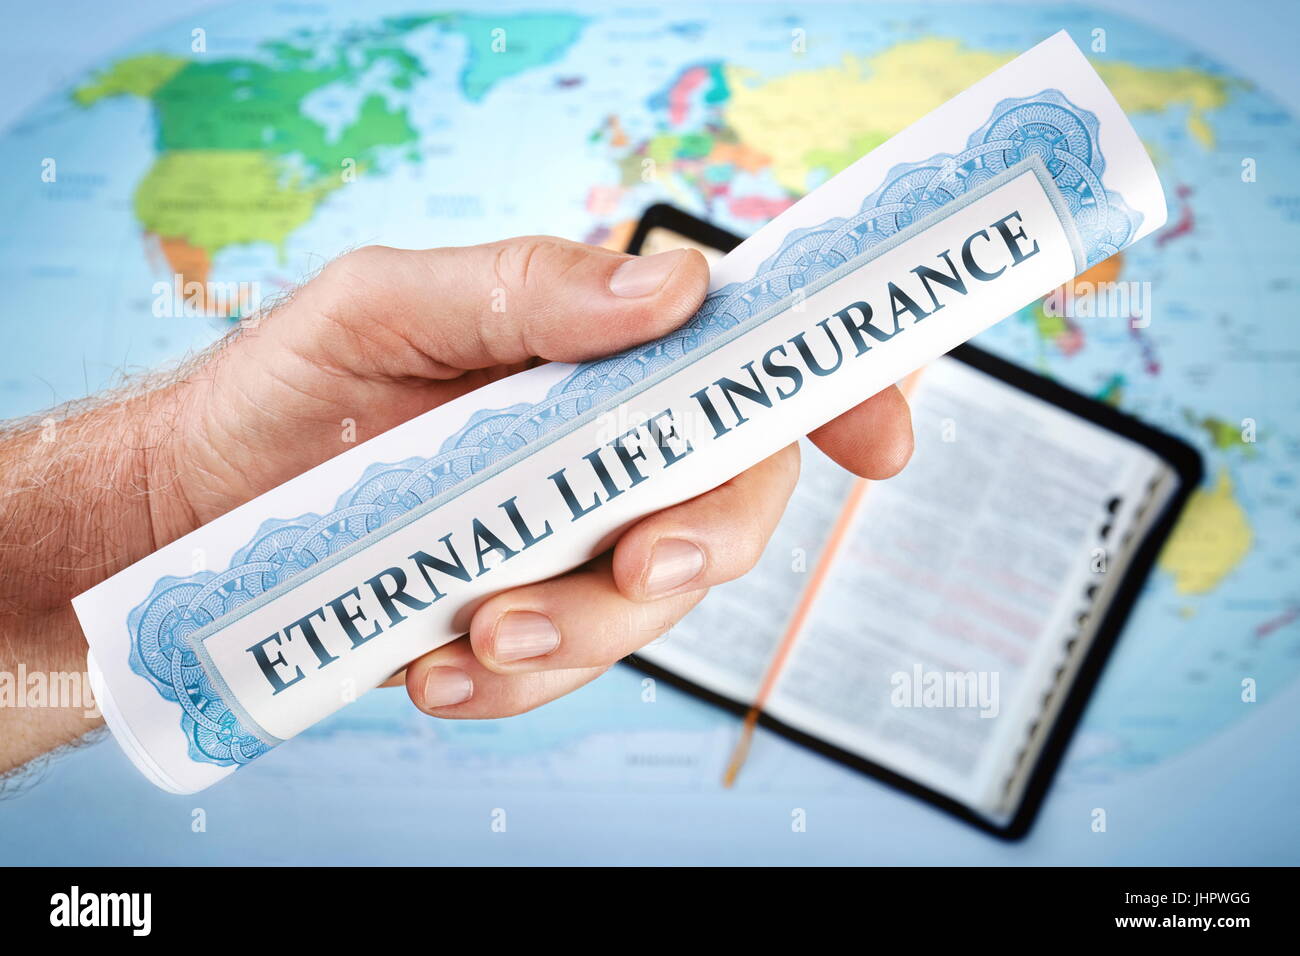 Concept of God's eternal life insurance 'certificate' from the Bible. The world offers all kinds of insurances bur not Eternal life insurance. Stock Photo